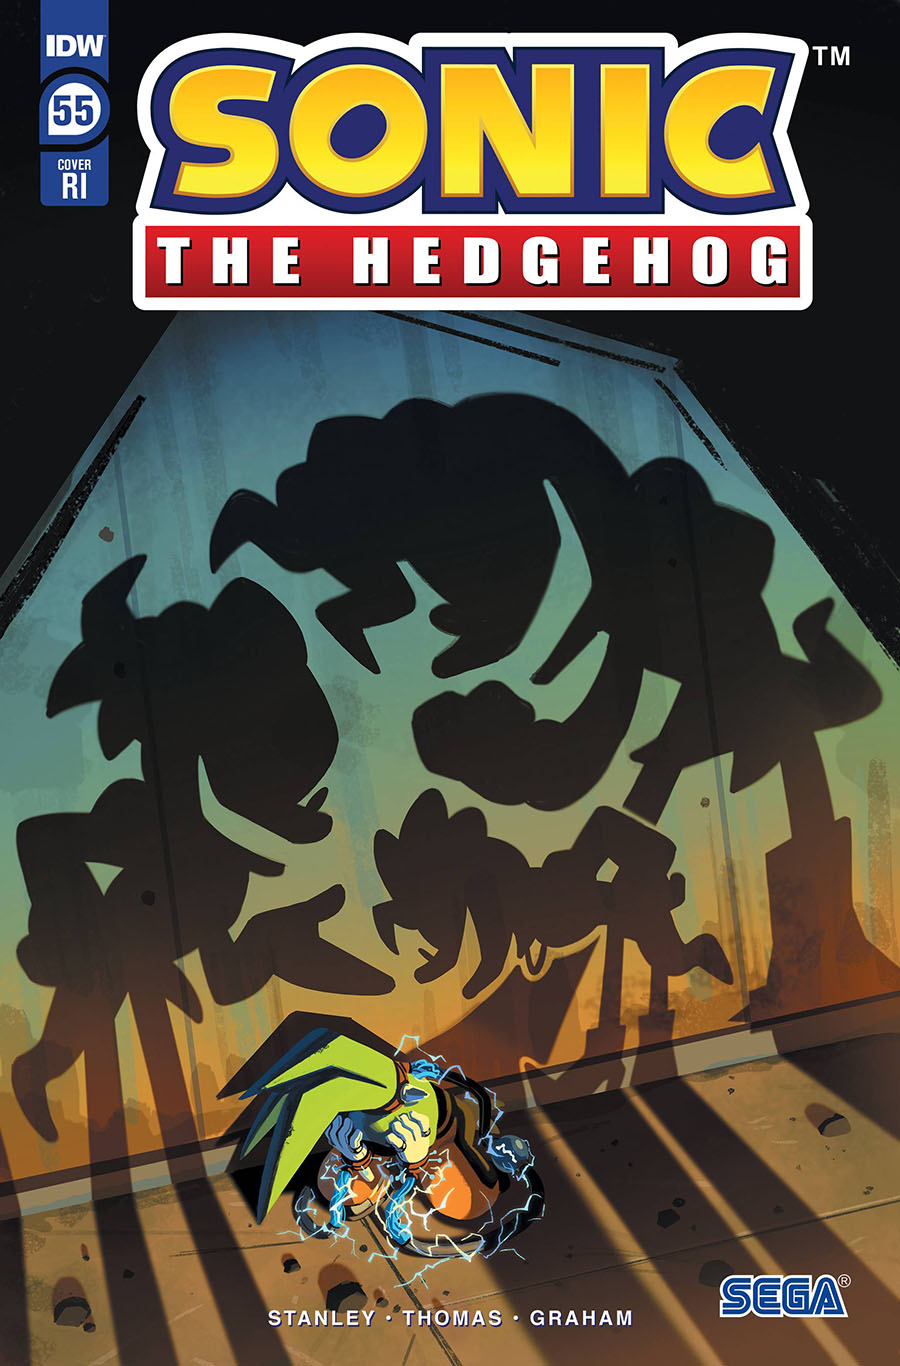 Sonic The Hedgehog Vol 3 #55 Cover C Incentive Nathalie Fourdraine Variant Cover